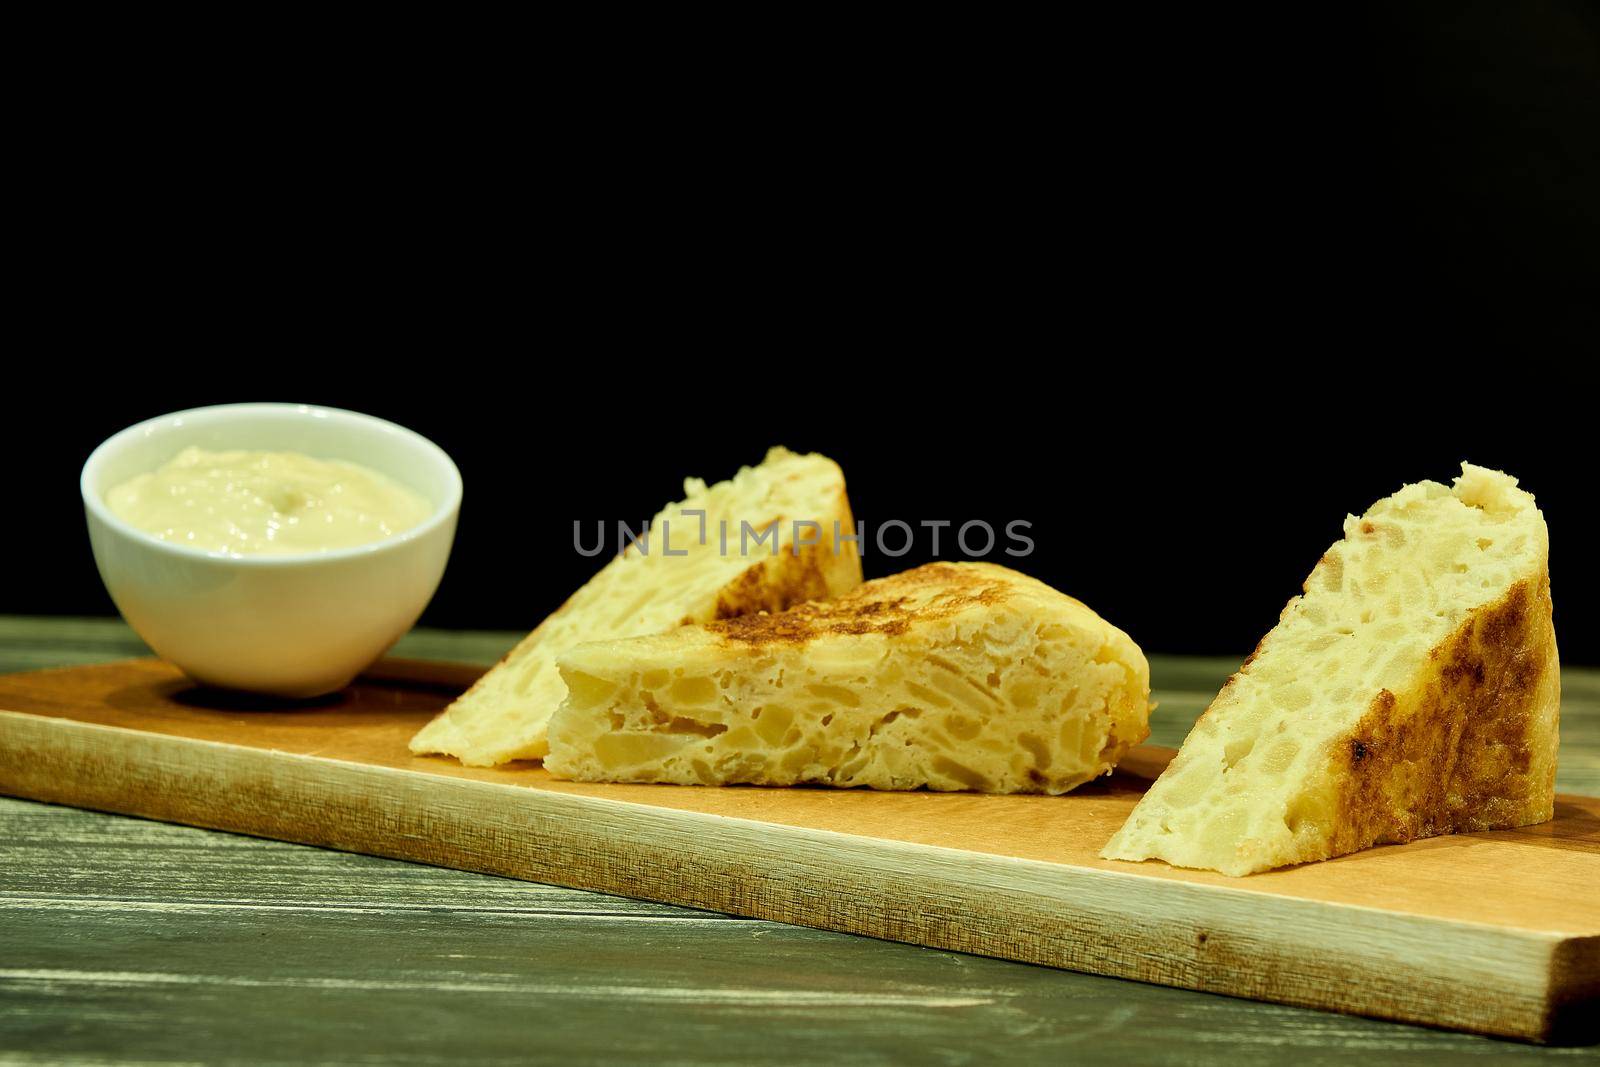 three skewers of potato omelette on an elongated brown wooden table with a bowl of white mayonnaise on a rustic wooden table and black background